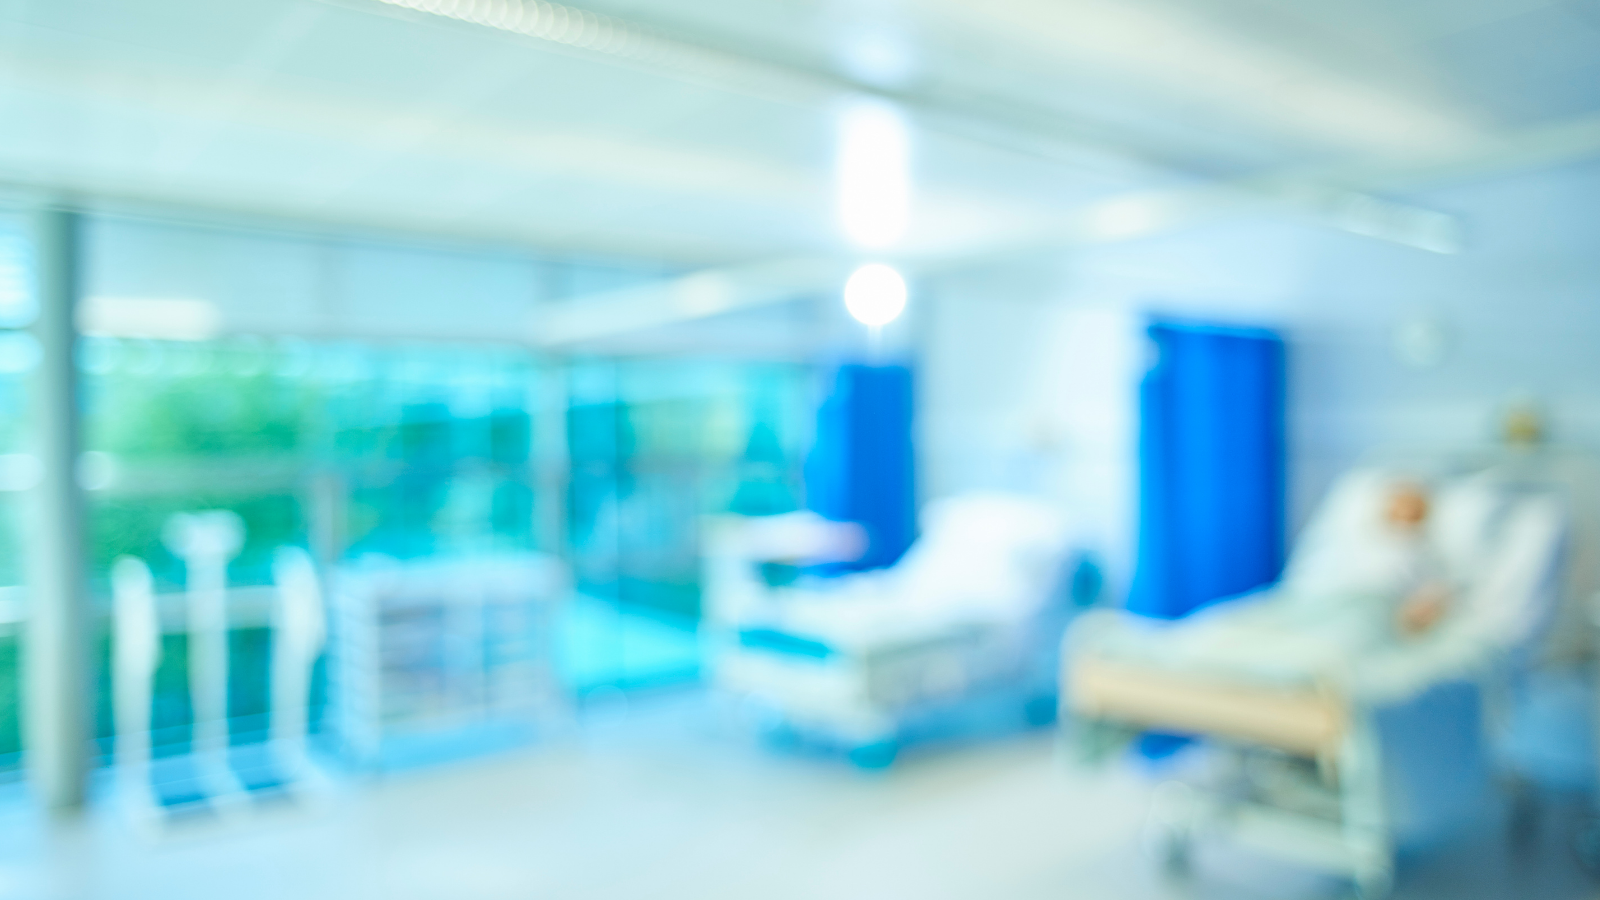 New Hospitals Programme blurred image